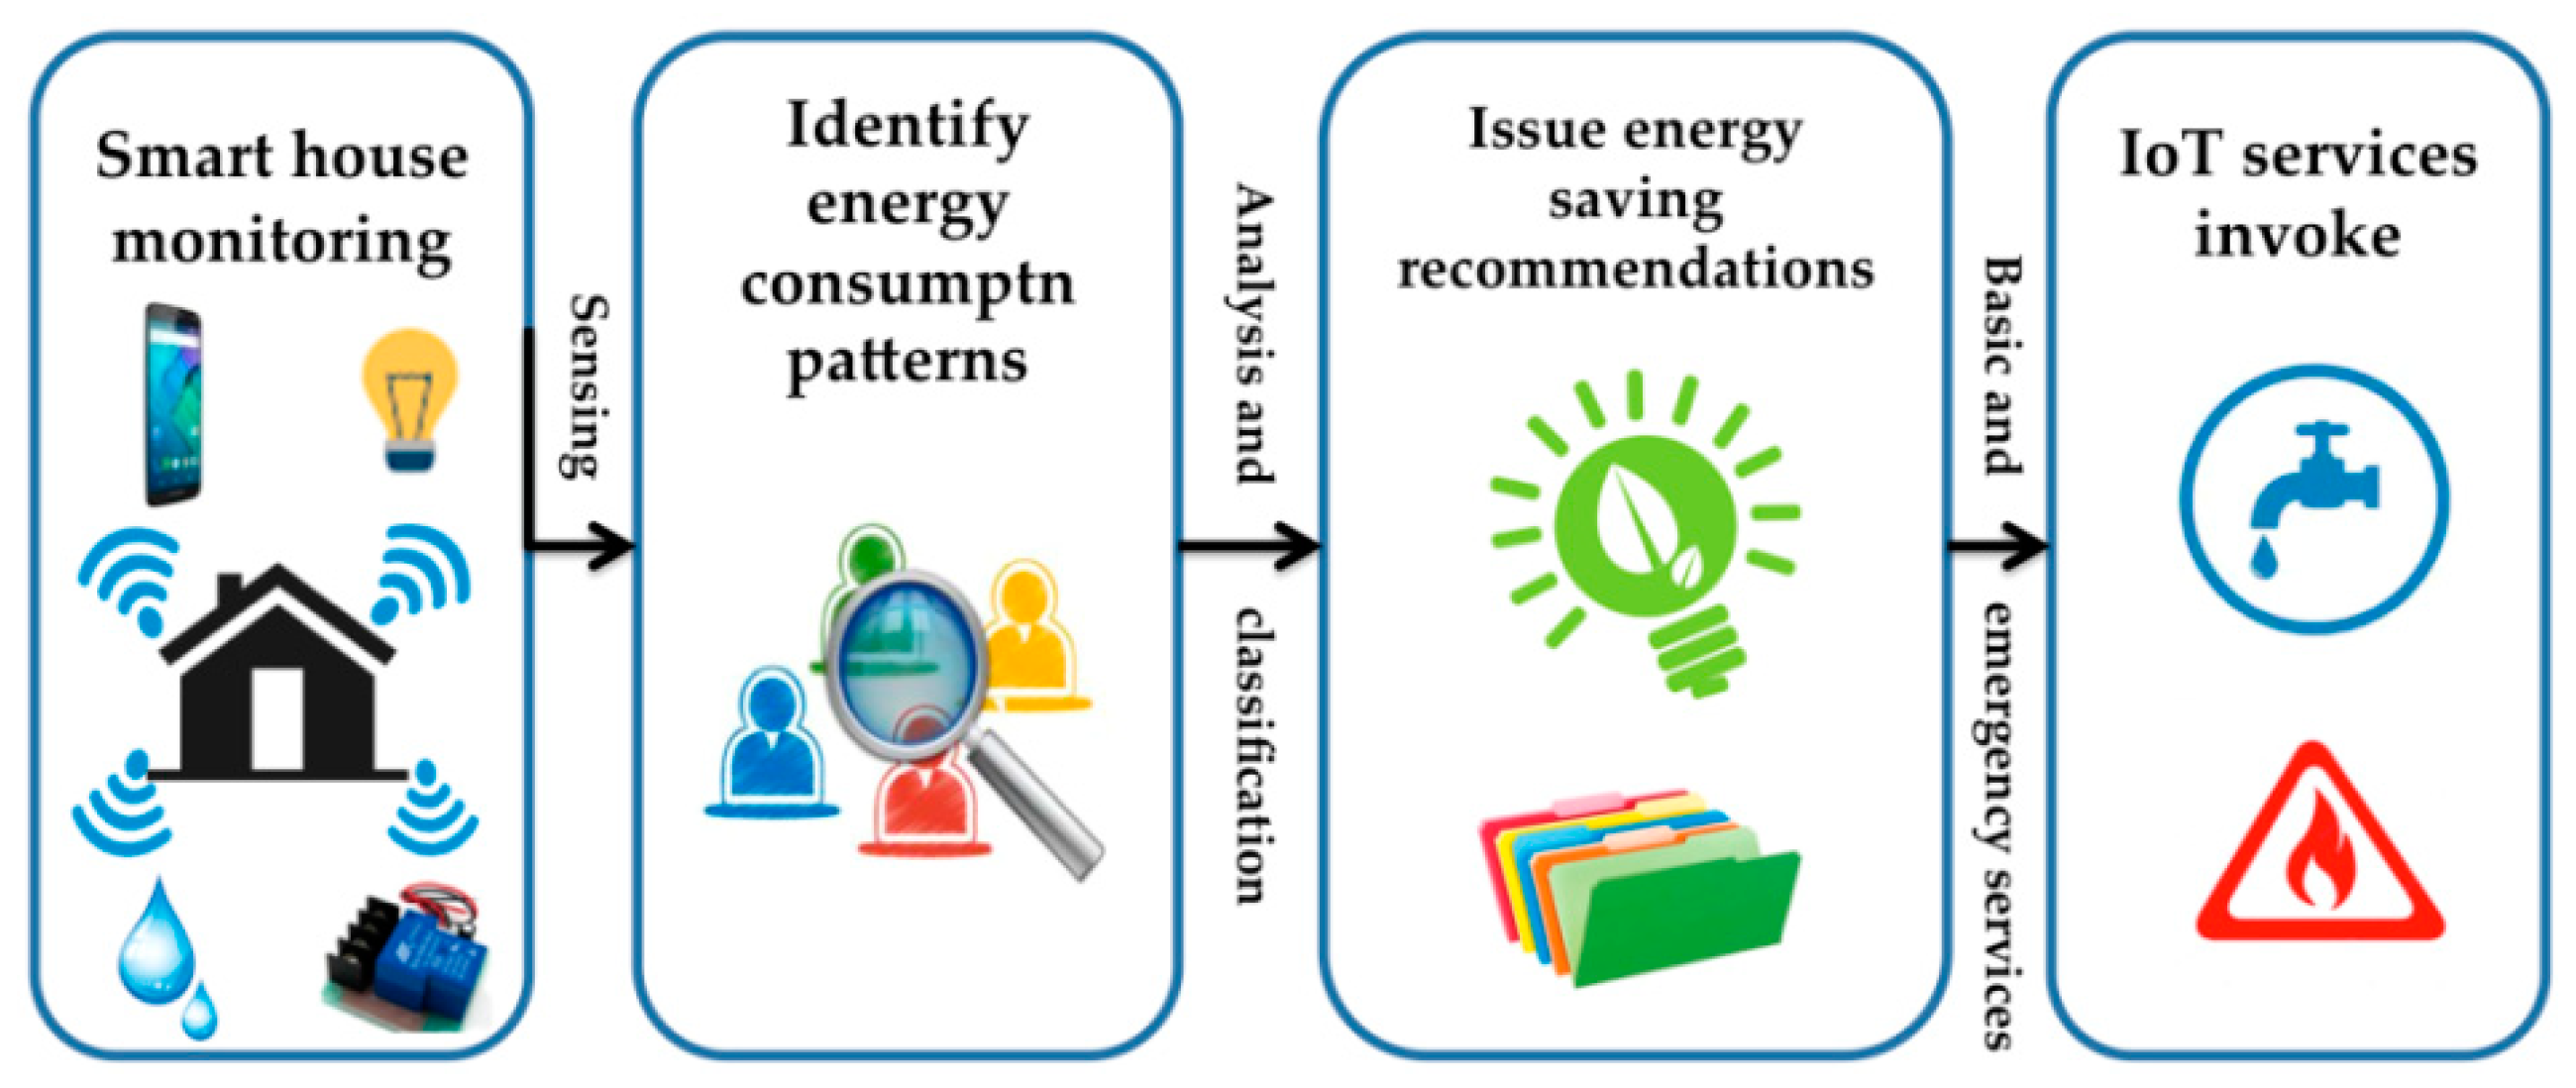 Energies | Free Full-Text | HEMS-IoT: A Big Data and Machine Learning-Based  Smart Home System for Energy Saving | HTML